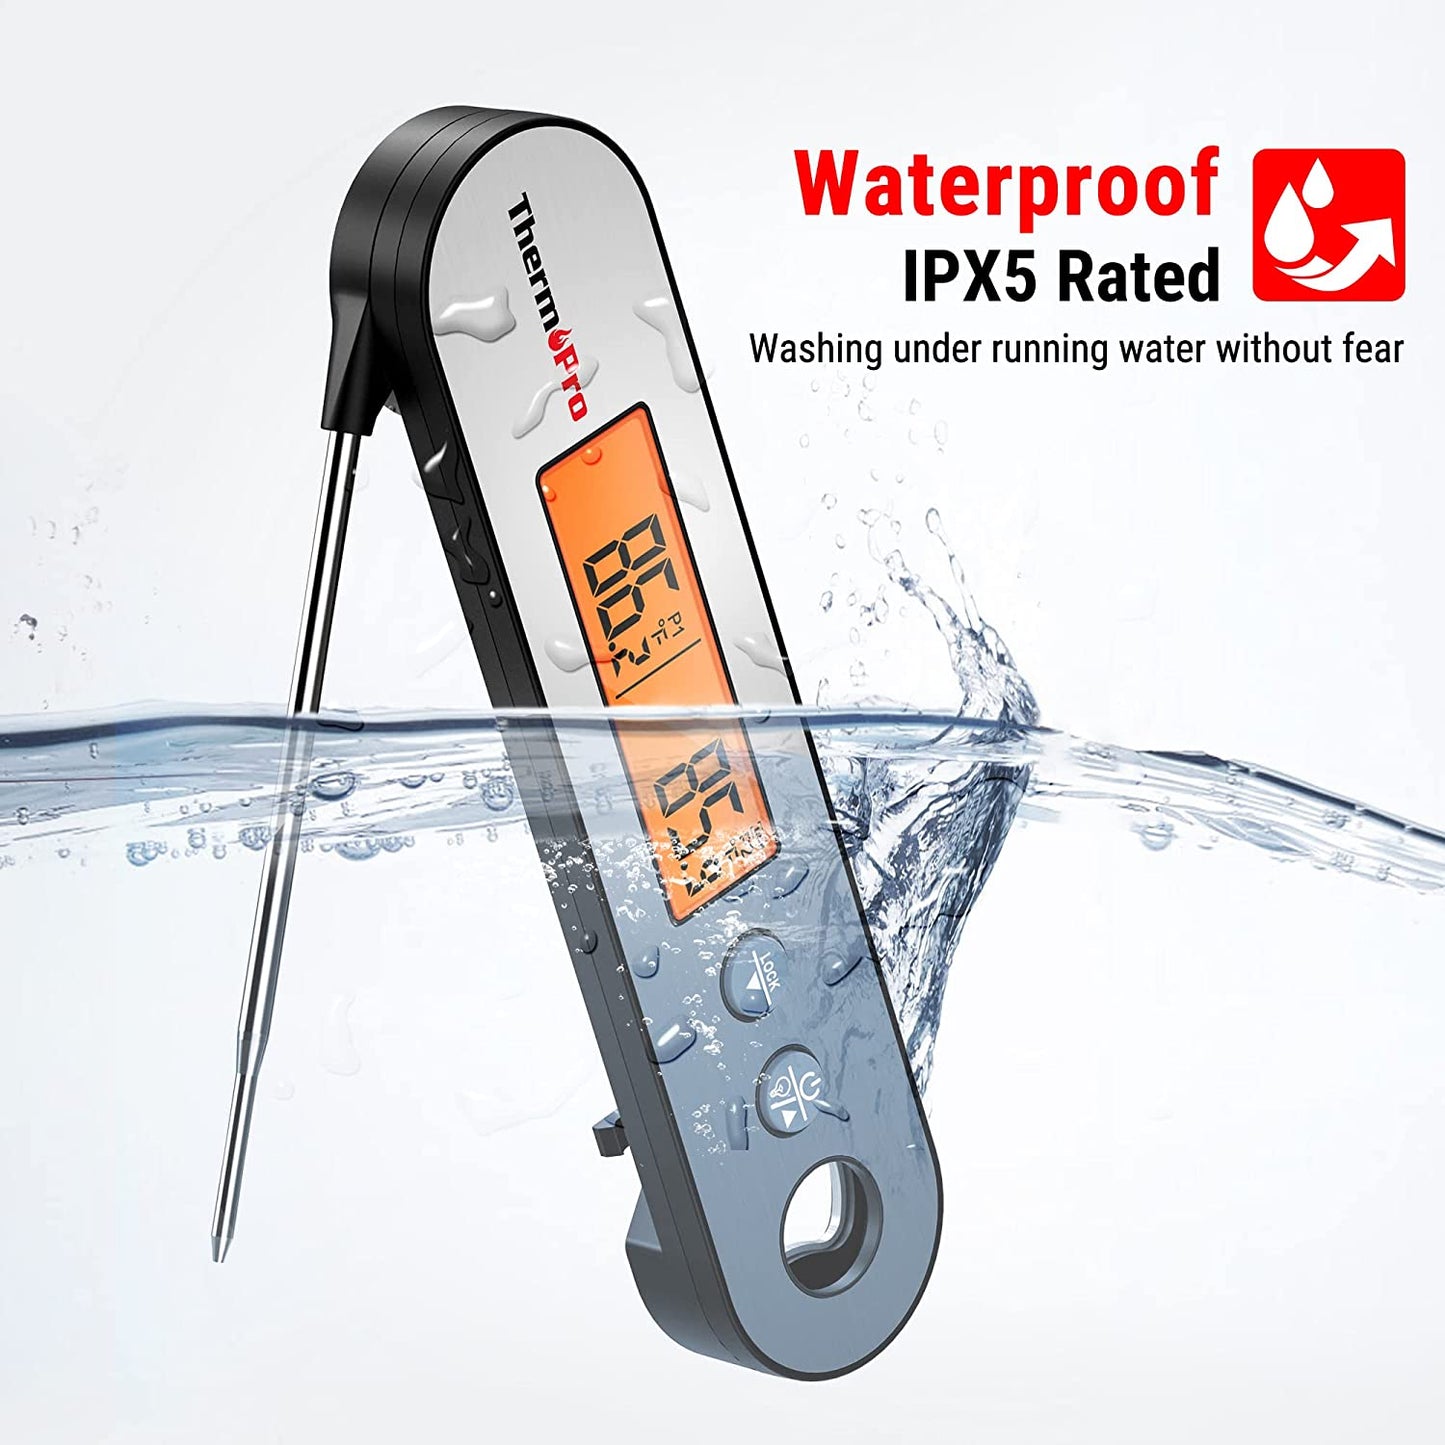 Thermopro TP-610 2-in-1 Dual Probe Waterproof Meat Thermometer with Instant Read and Alert Function Features Perfect for Grilling and Oven Cooking